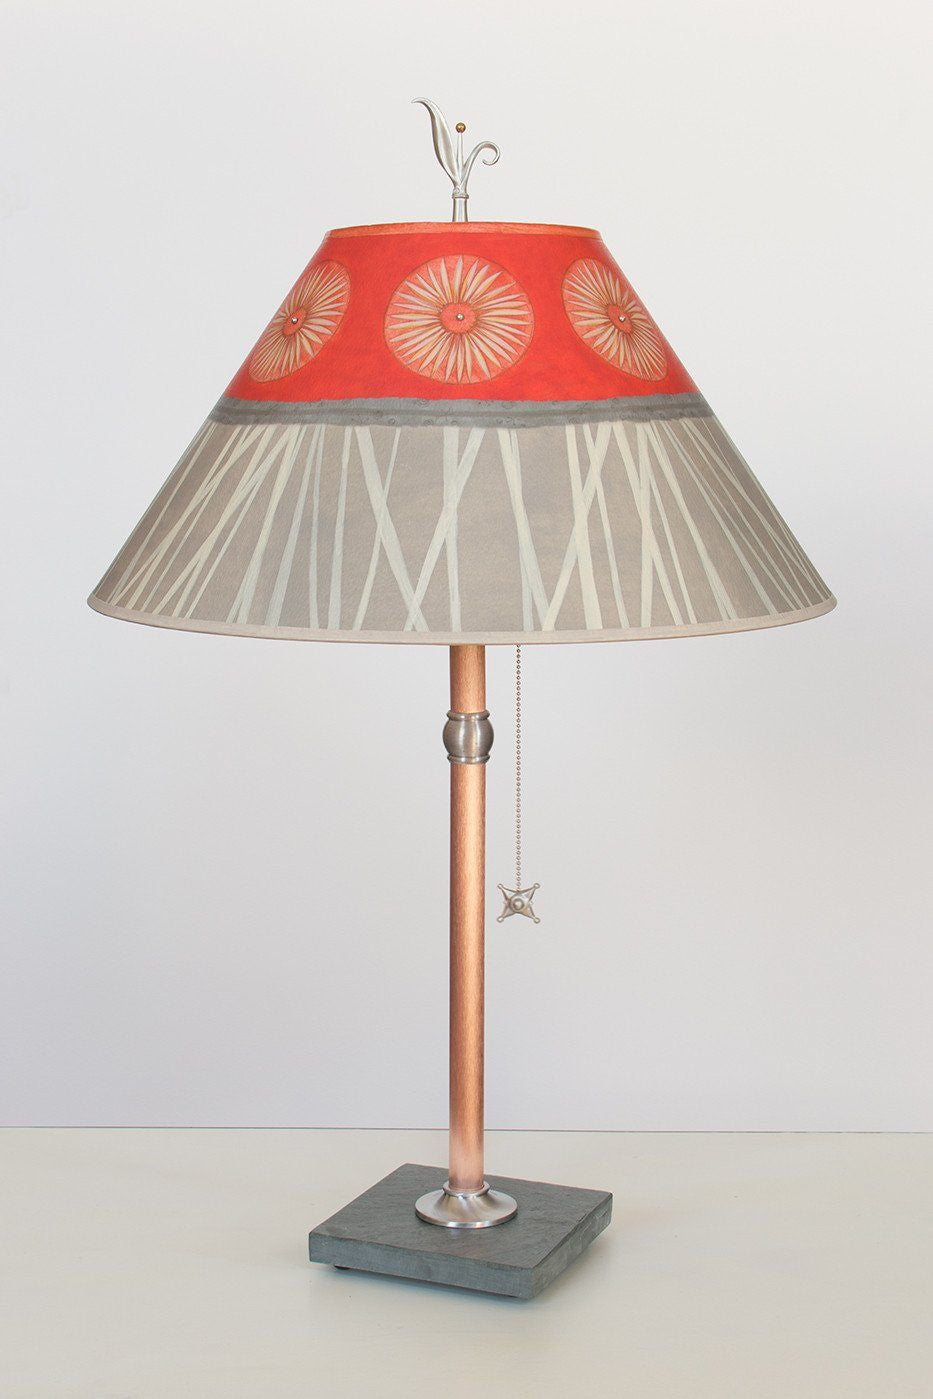 Copper Table Lamp on Vermont Slate with Large Conical Shade in Tang